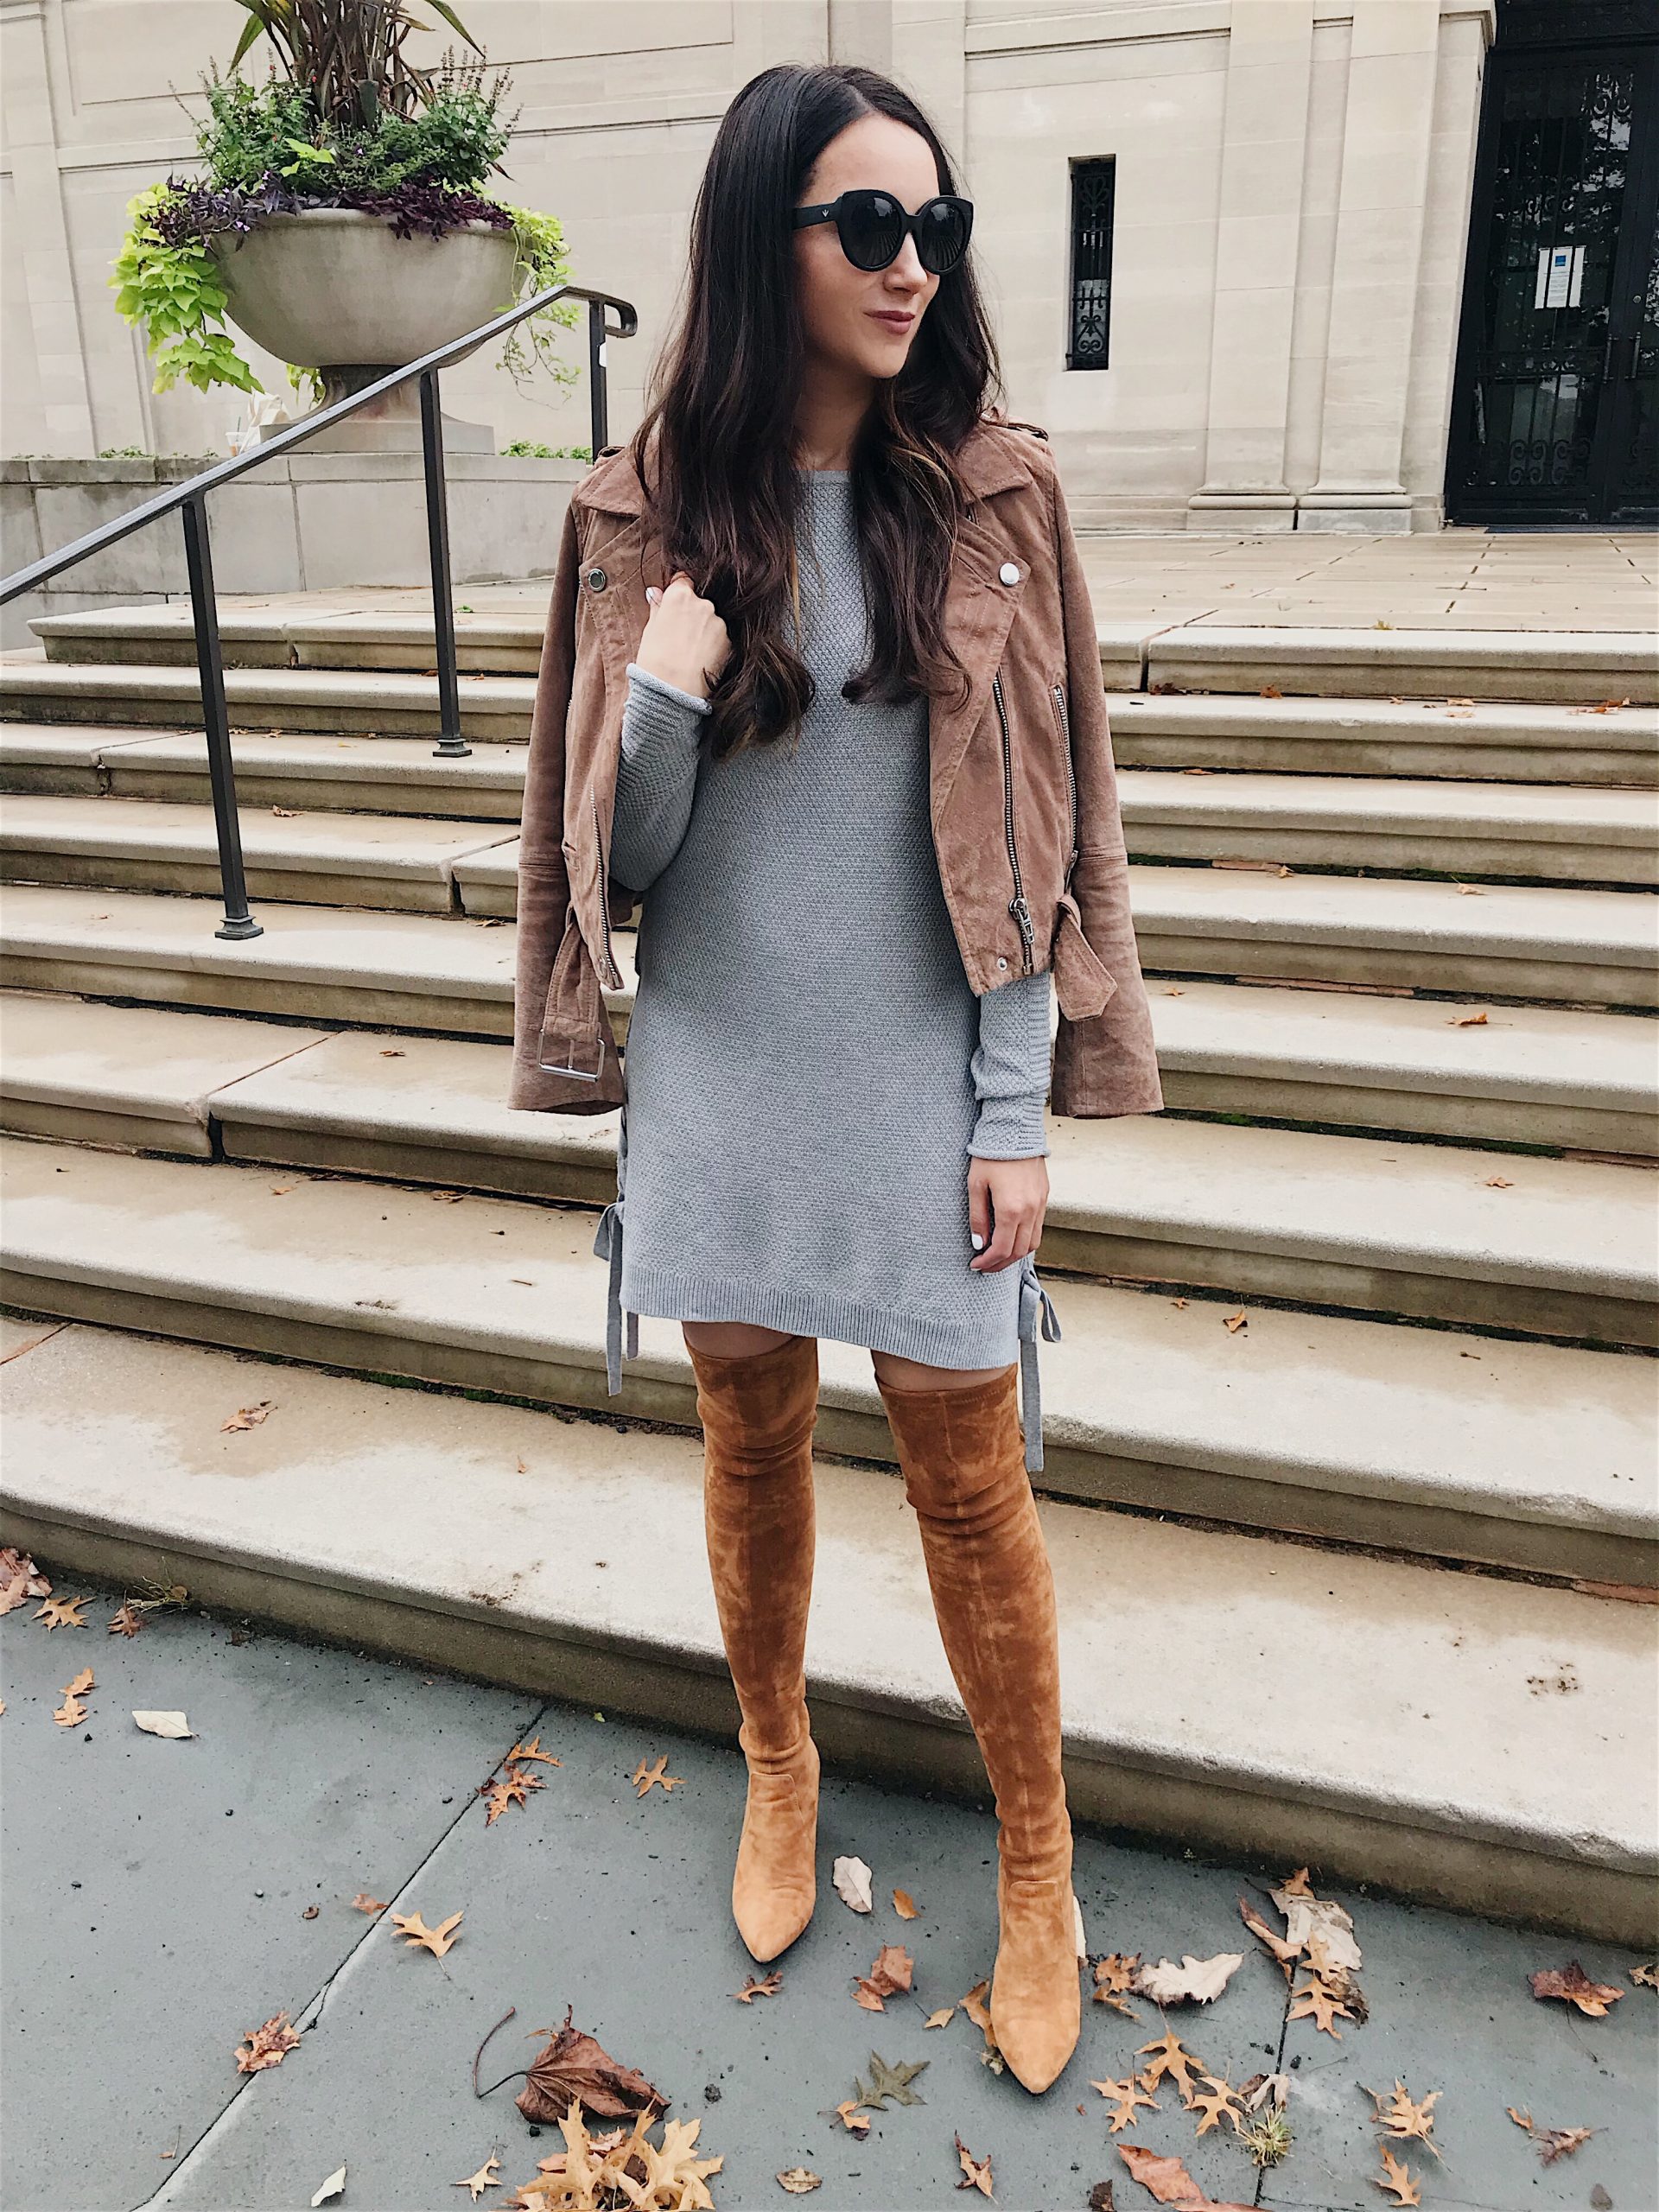 Blushing Rose Style blog wearing grey sweater dress with brown over the knee boots and suede moto jacket in tunic top styled 3 ways